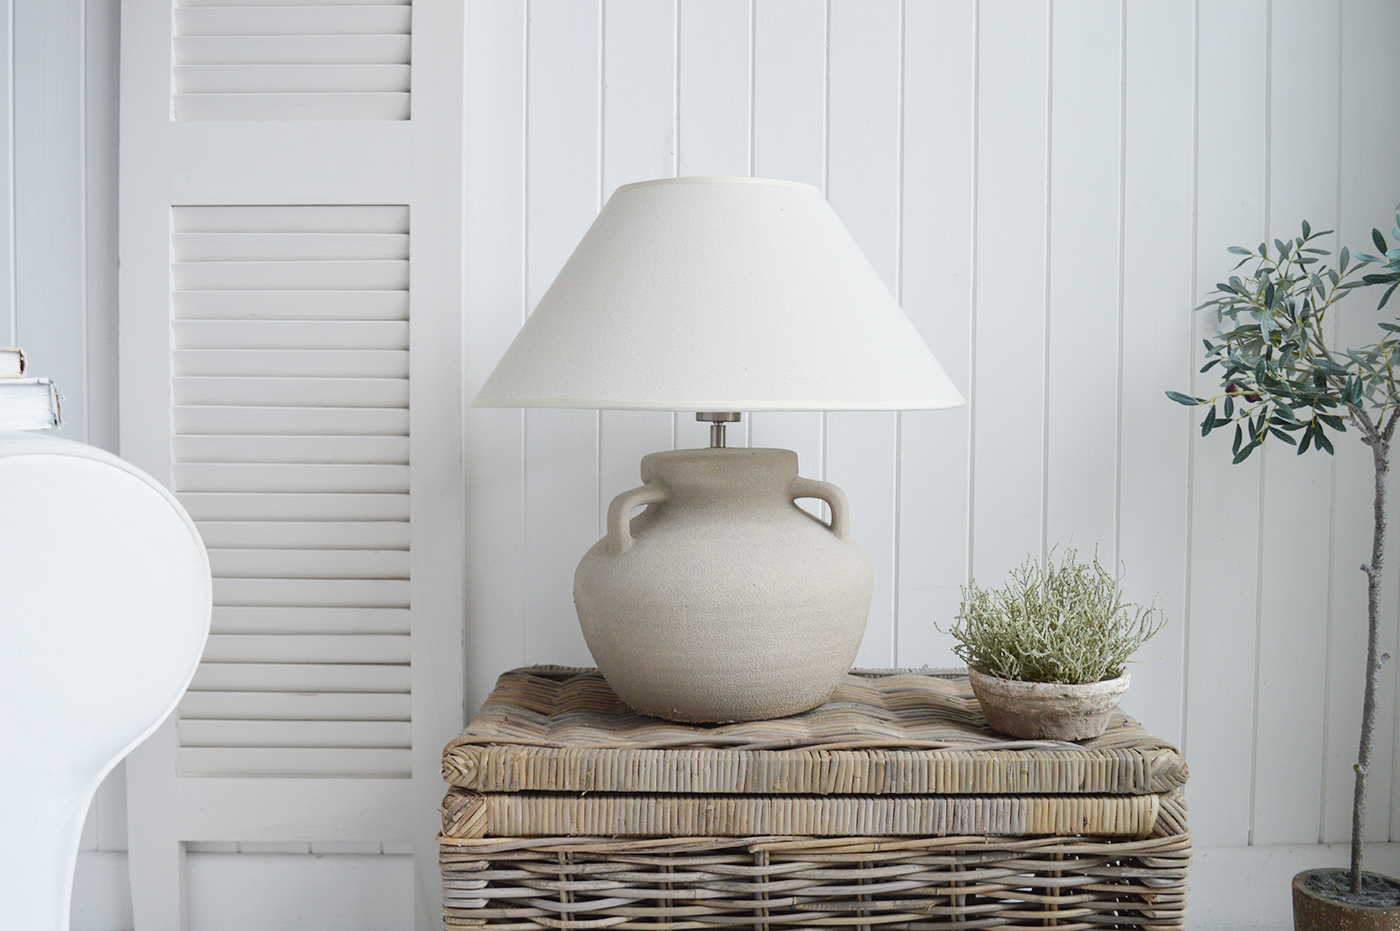 Winslow Stone Lamp - New England Coastal Style Table Lamps in a bedroom